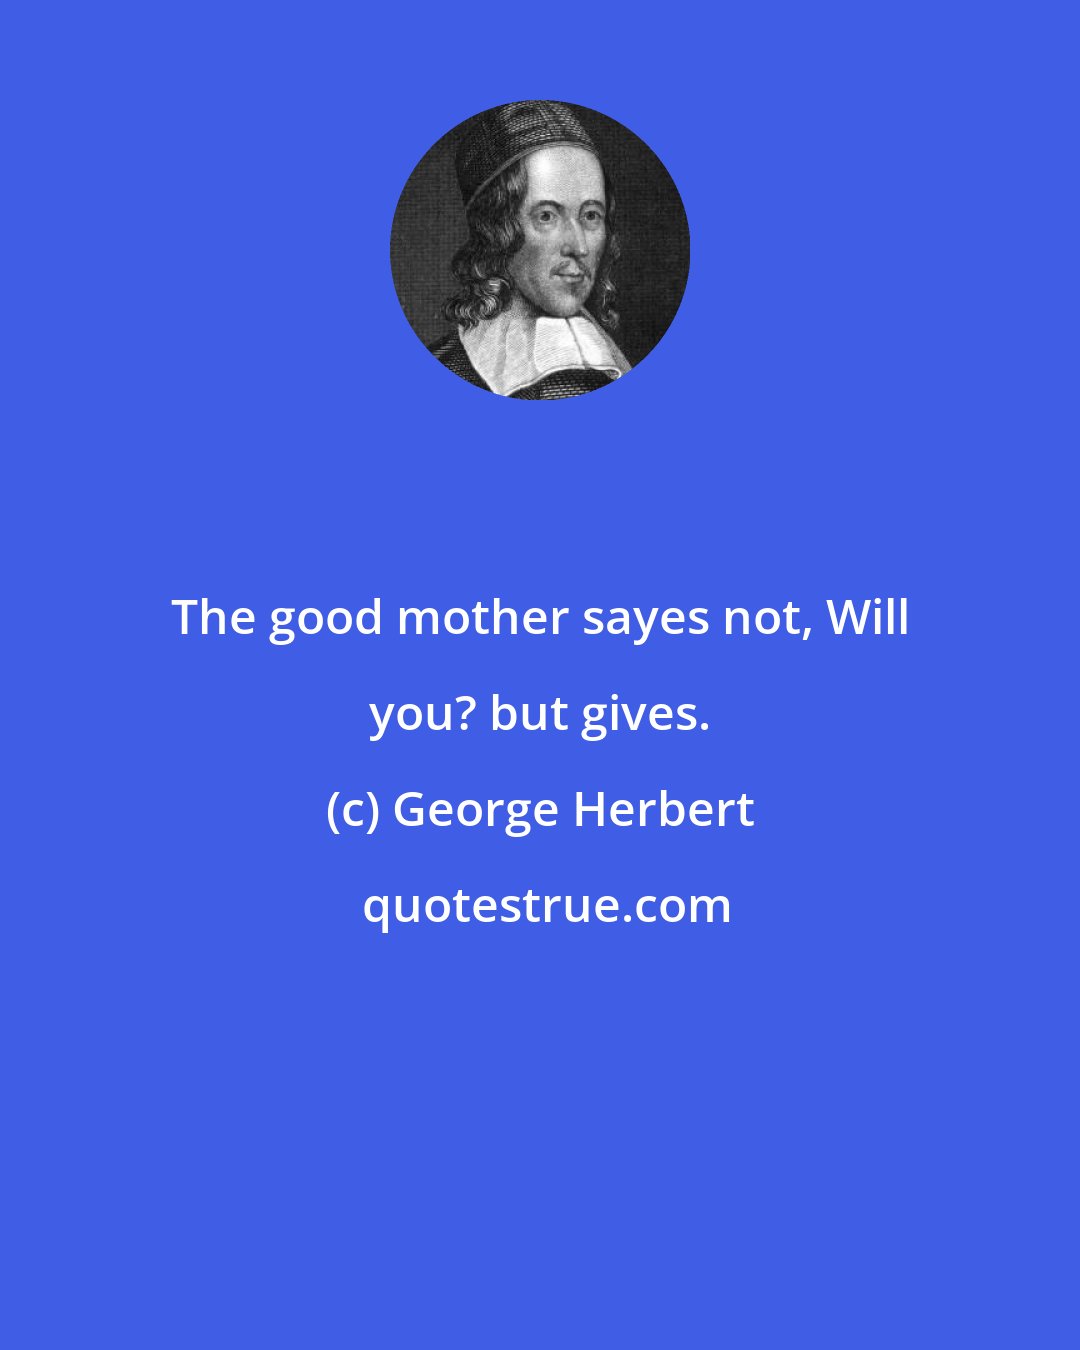 George Herbert: The good mother sayes not, Will you? but gives.